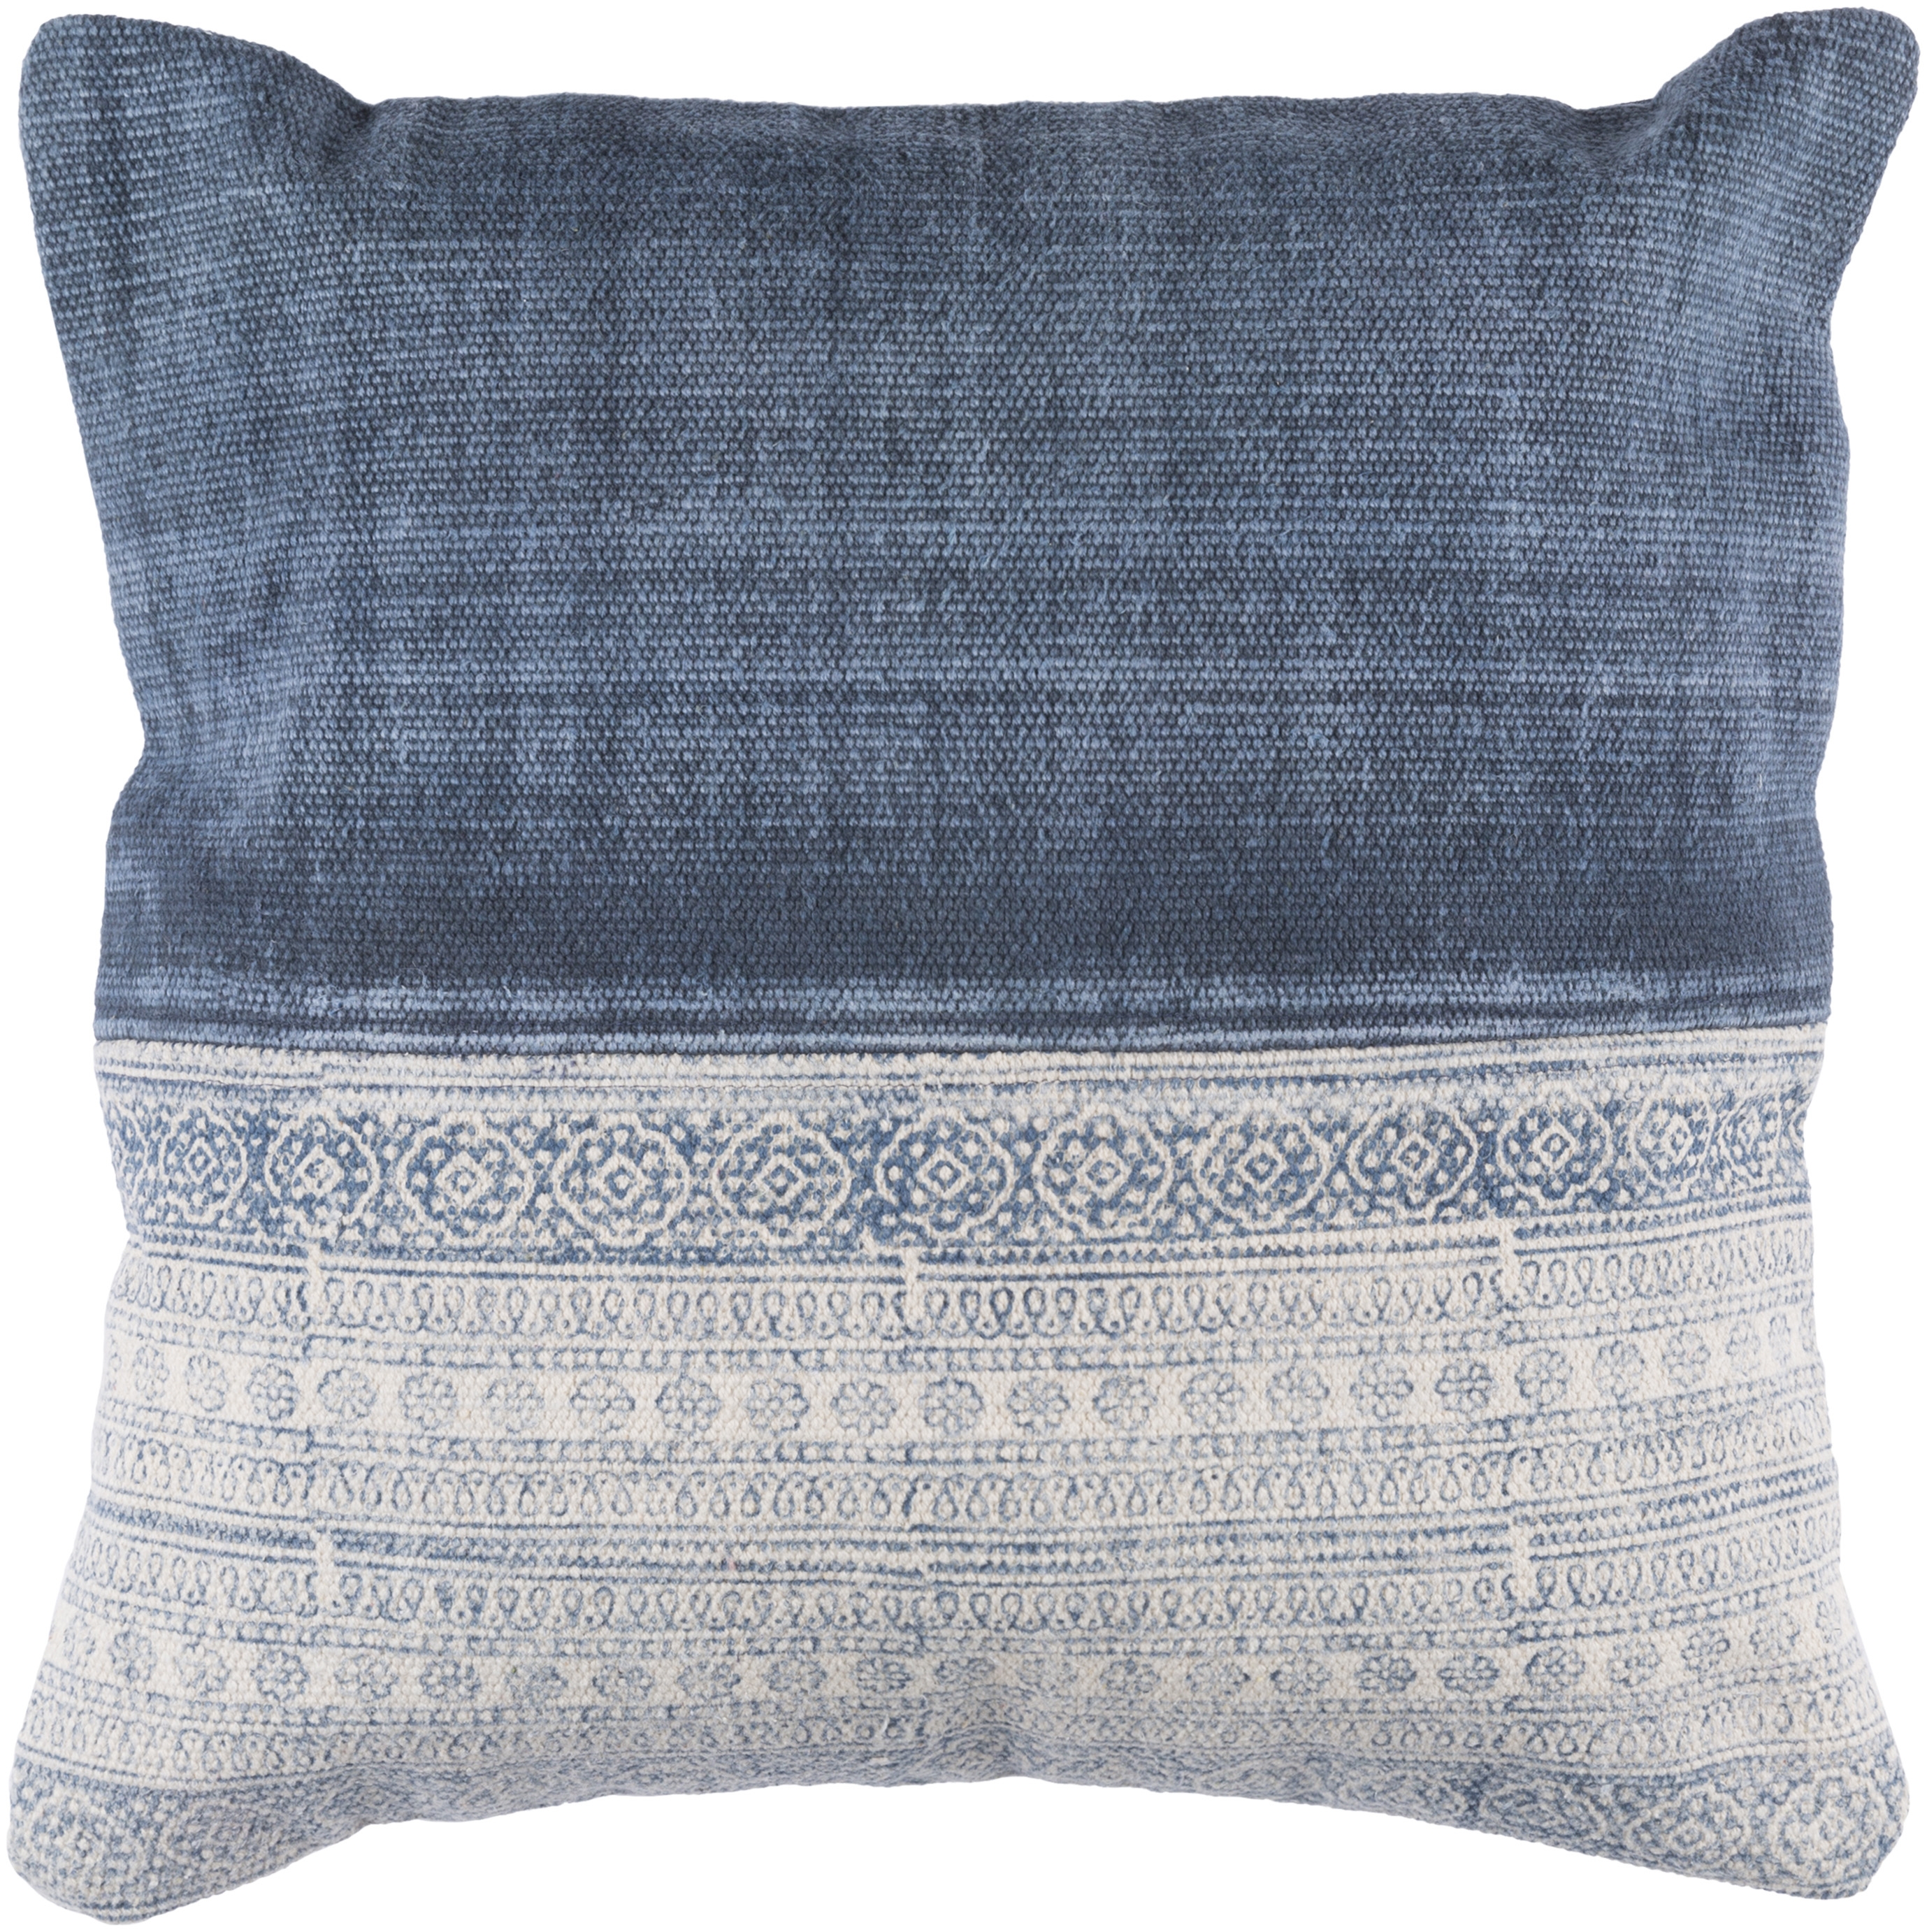 Lola Throw Pillow, 20" x 20", with down insert - Image 0